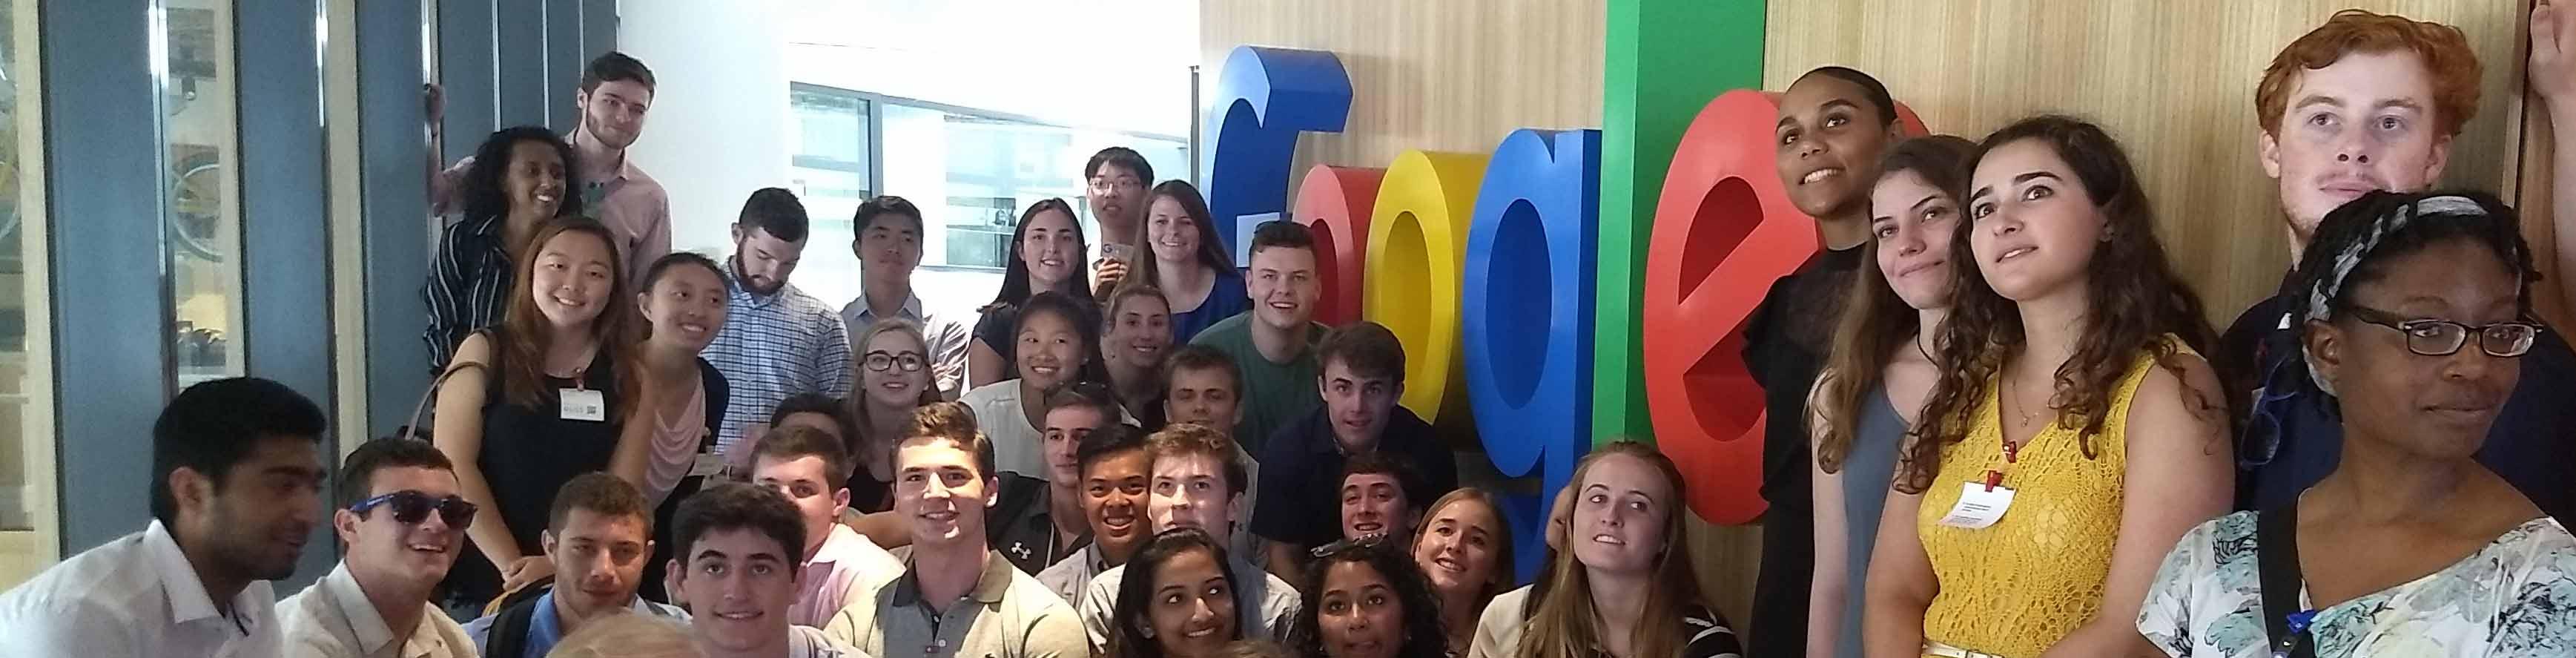 BSE students pose in front of Google sign